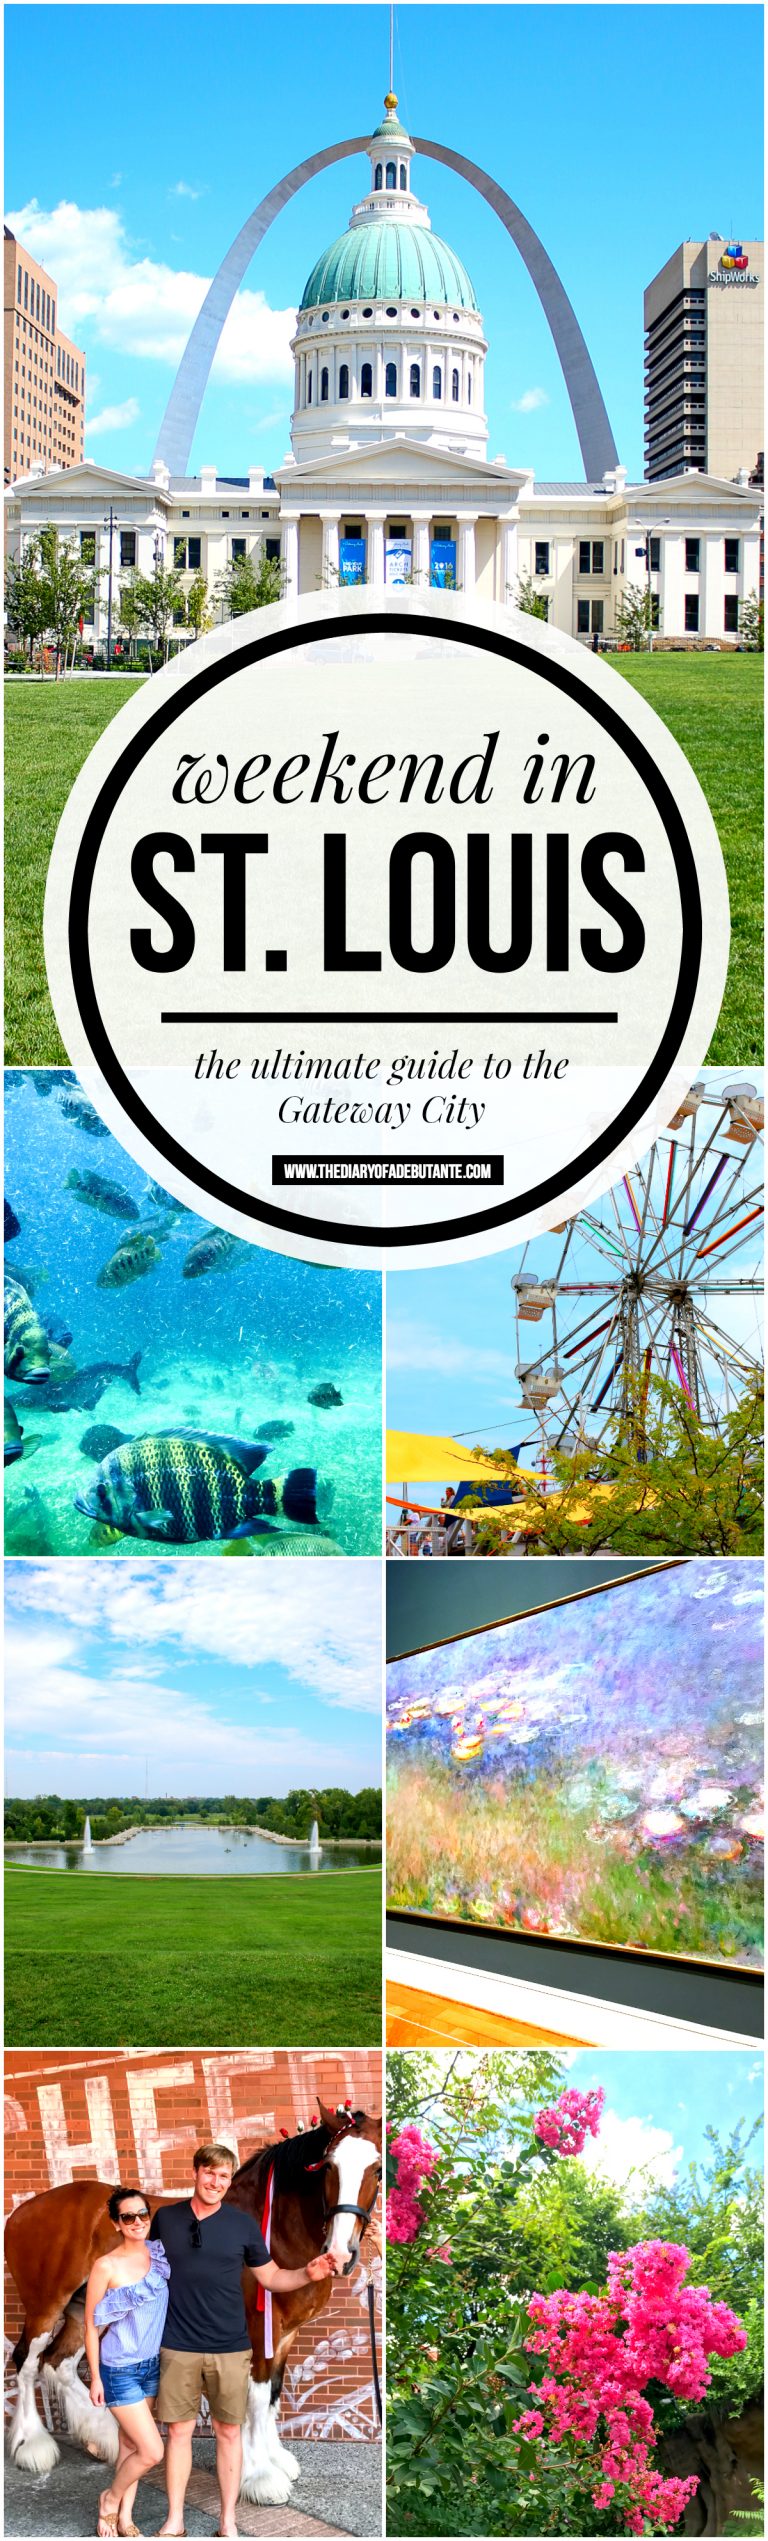 Fun Things to Do in St. Louis Weekend Travel Guide